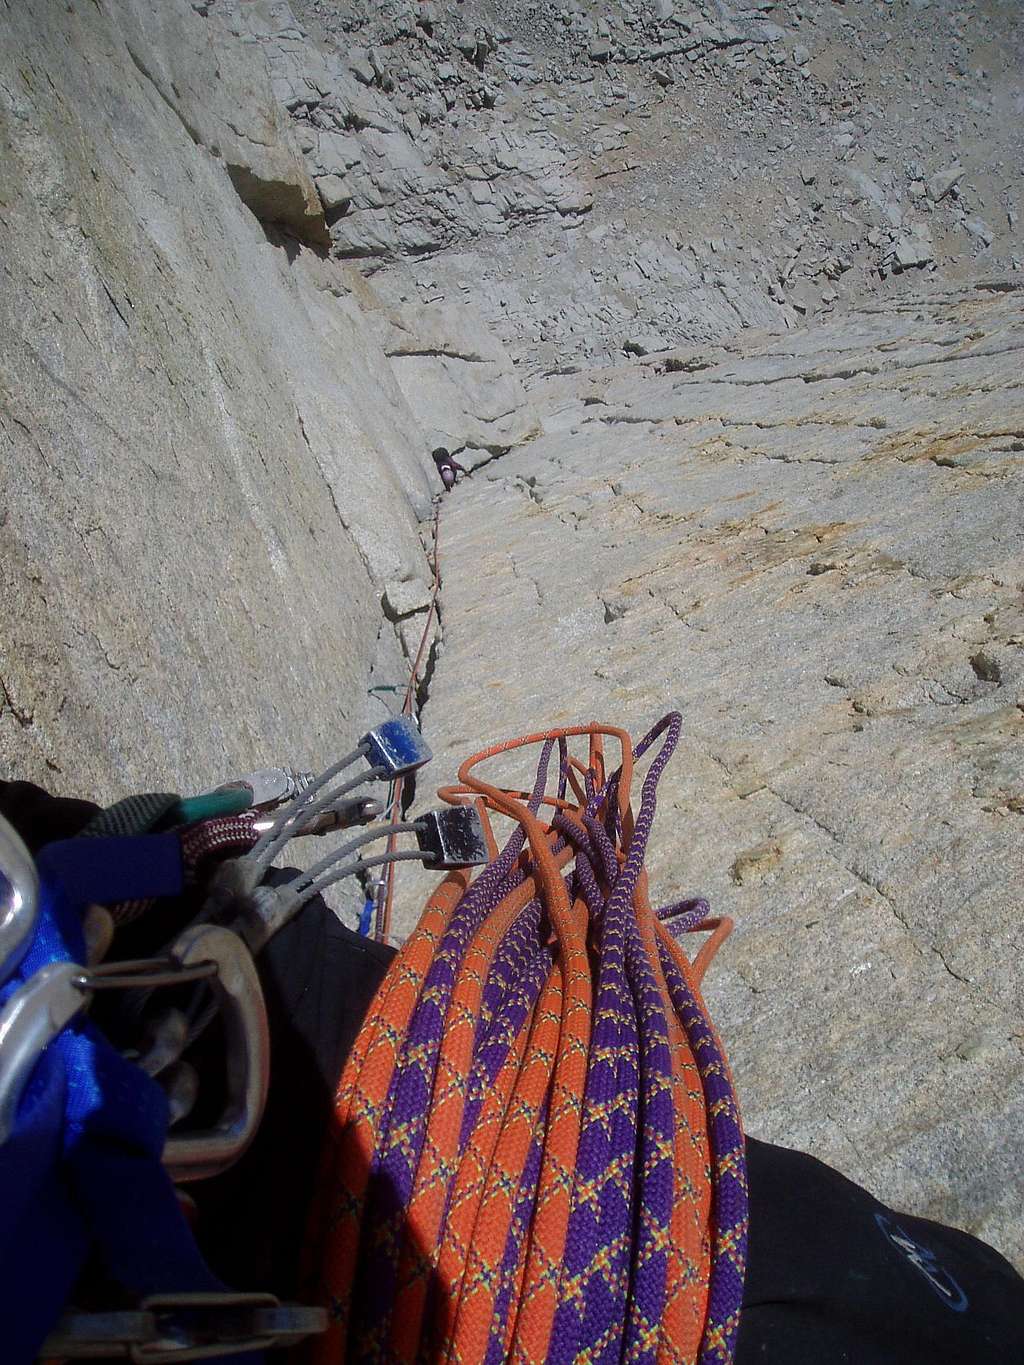 Troutman following the 1st pitch of the Dihedral